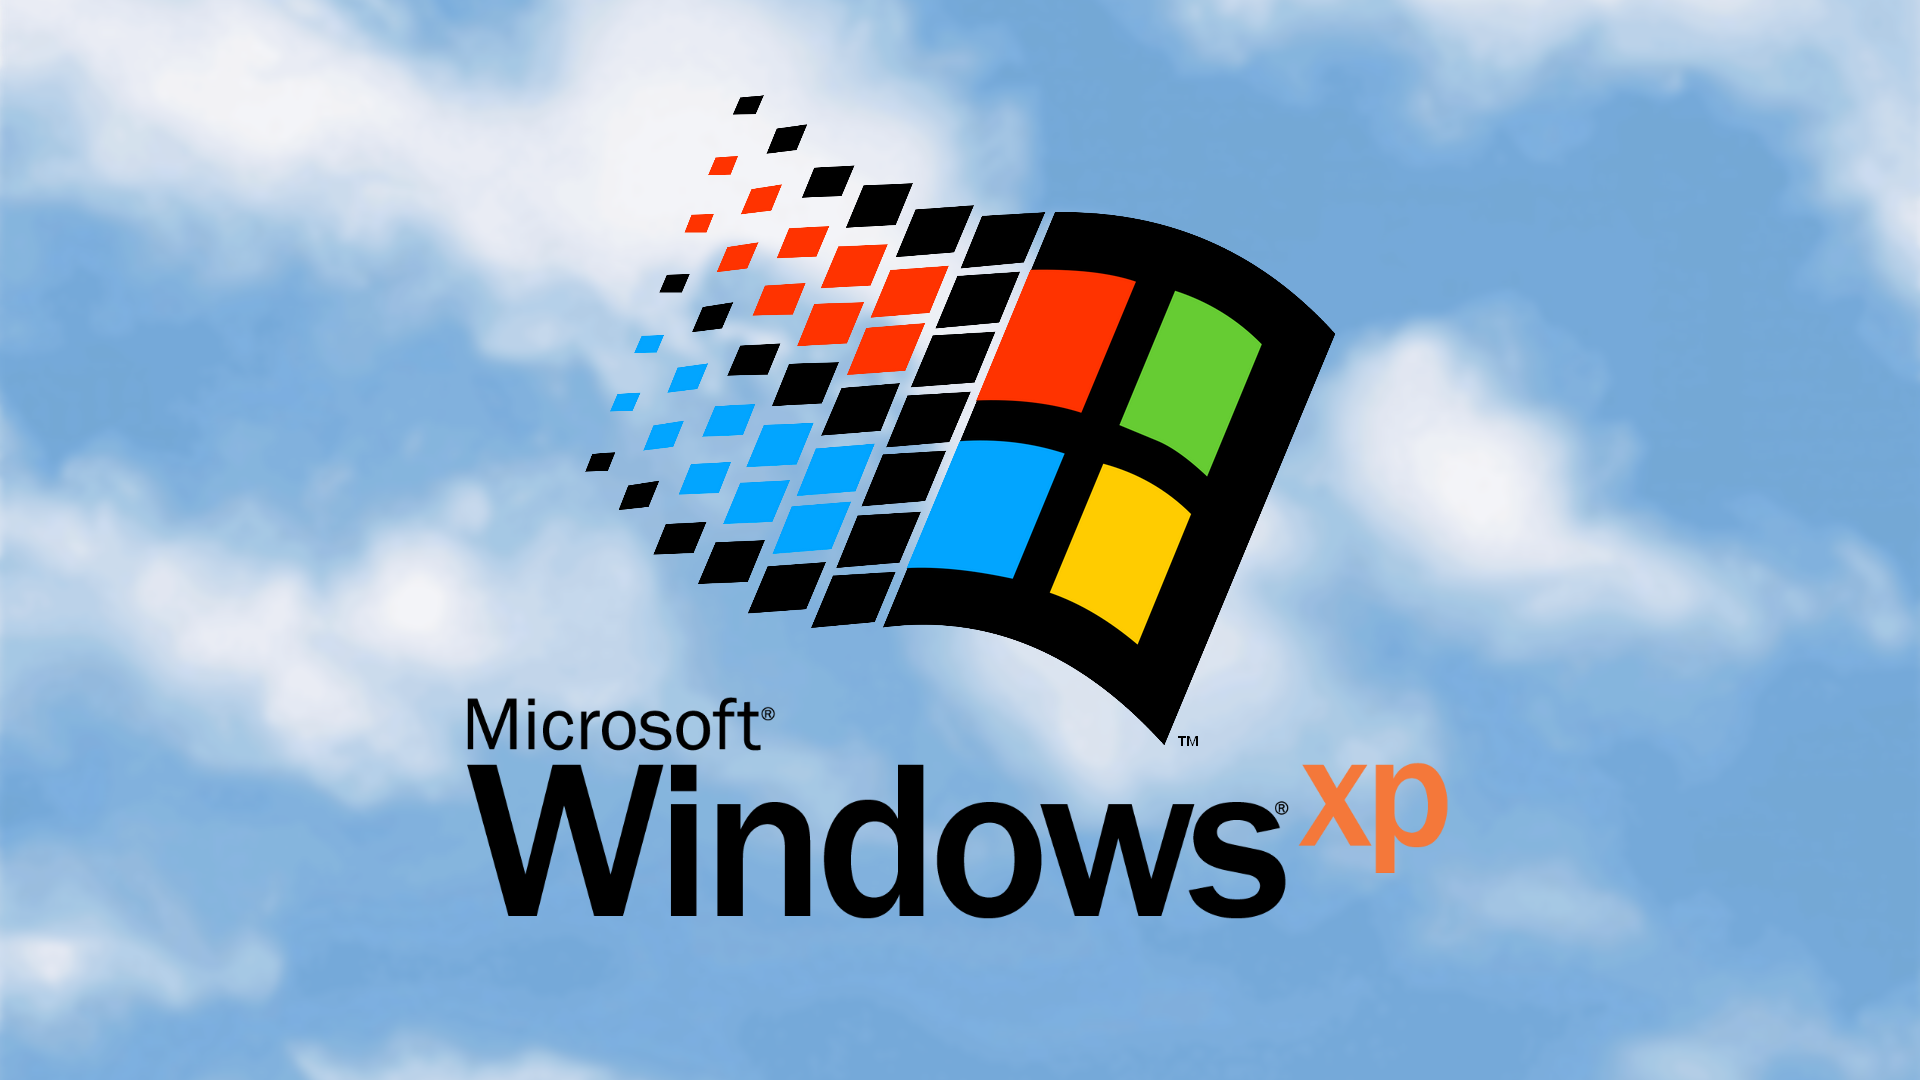 Windows xp clouds by eric on